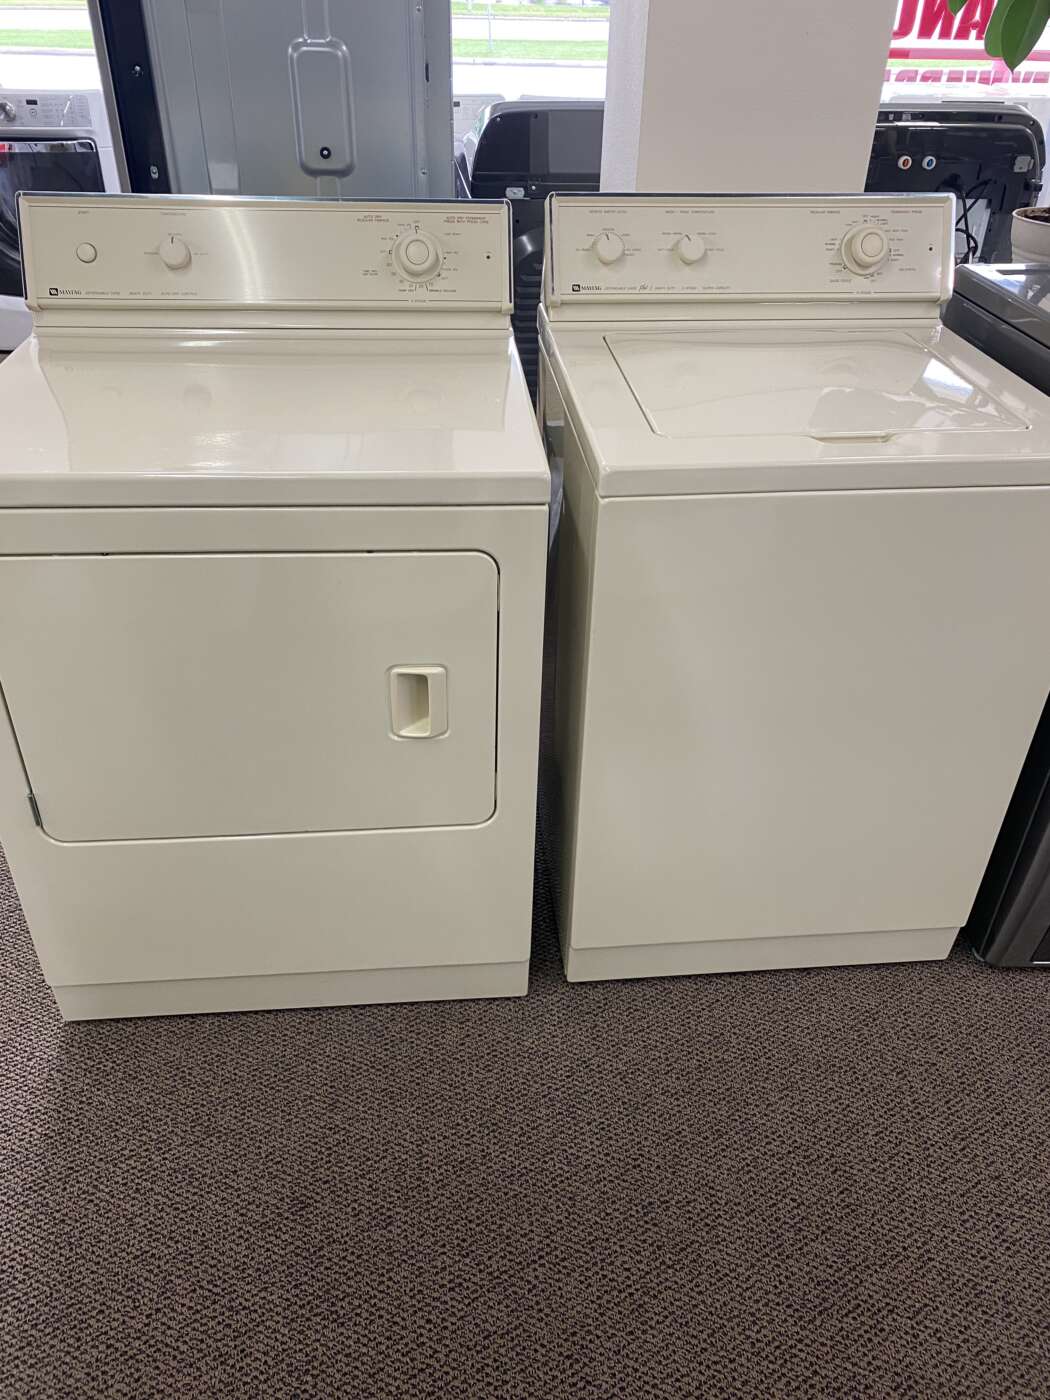 Reconditioned MAYTAG Top-Load Washer And Electric Dryer (Bisque) Matching Set